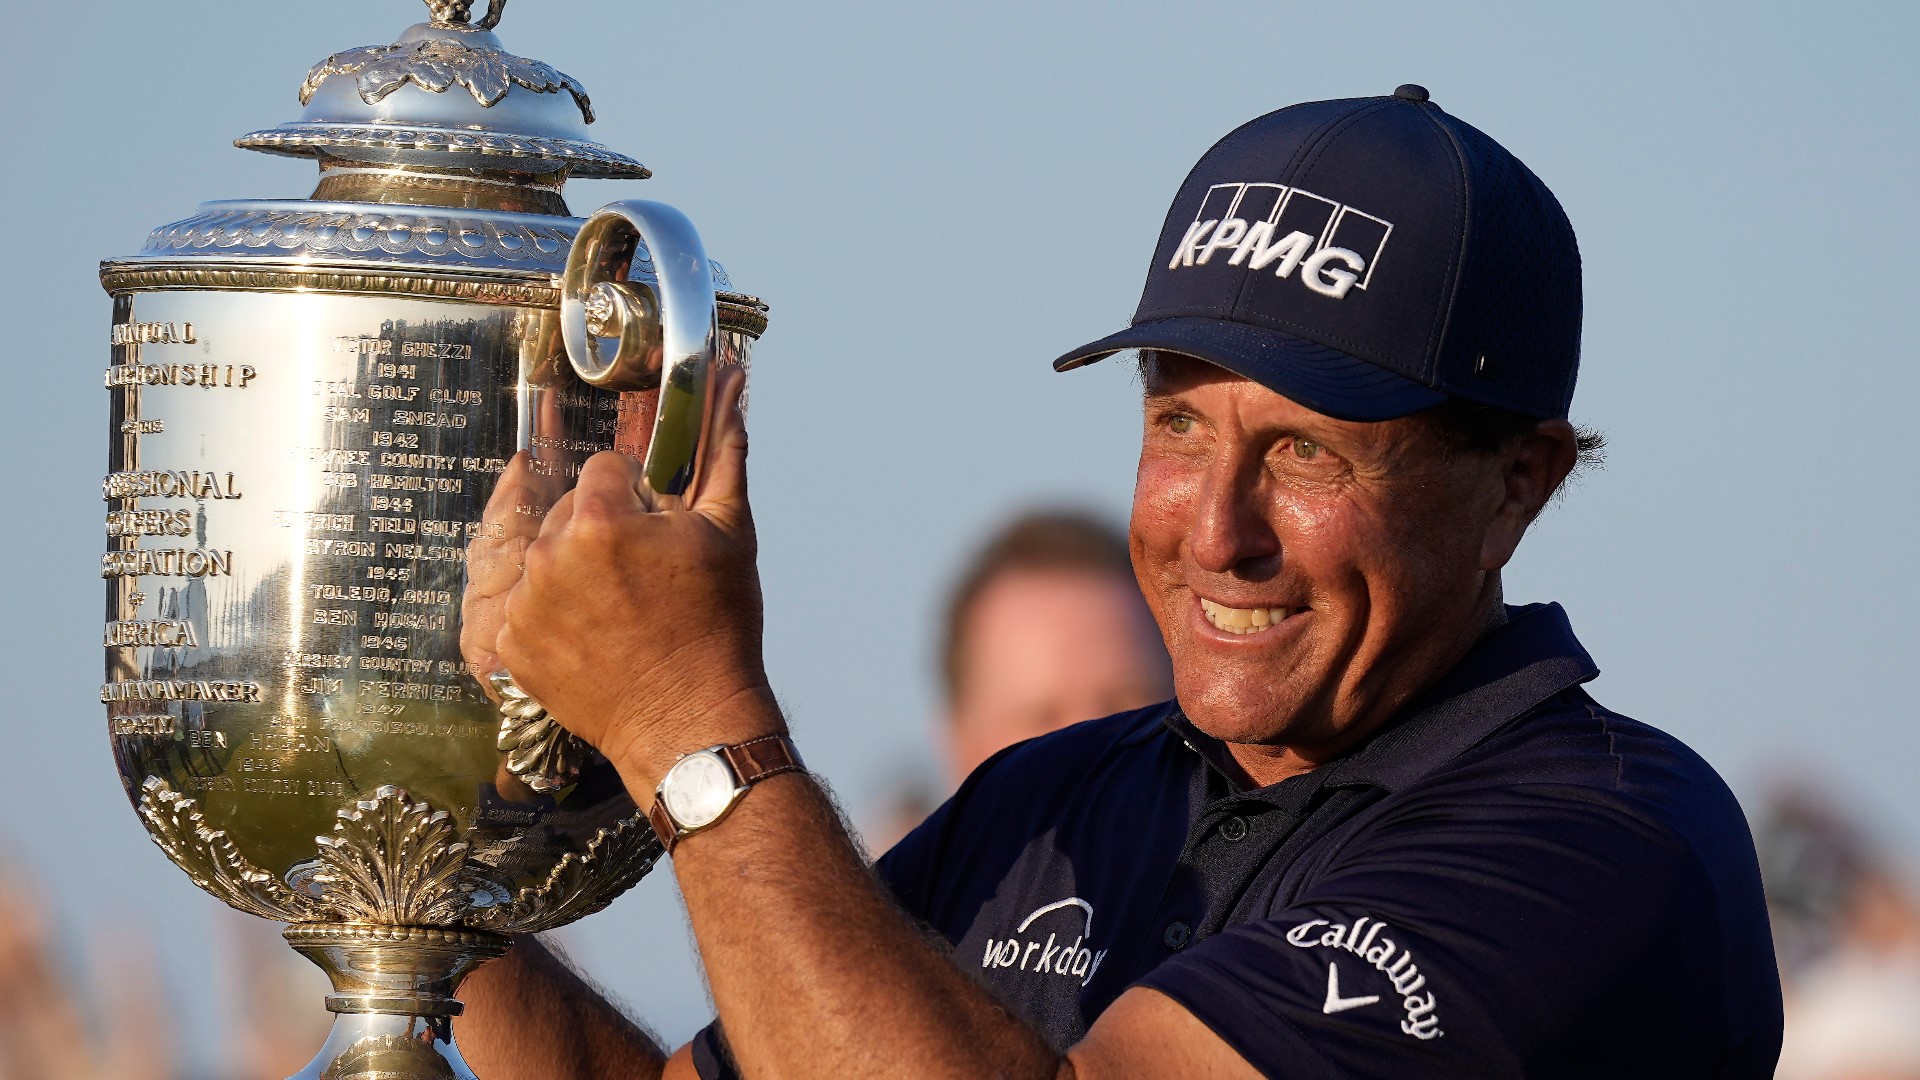 50-year-old Phil Mickelson becomes the oldest golfer to win a major after capturing the PGA Championship on Sunday.